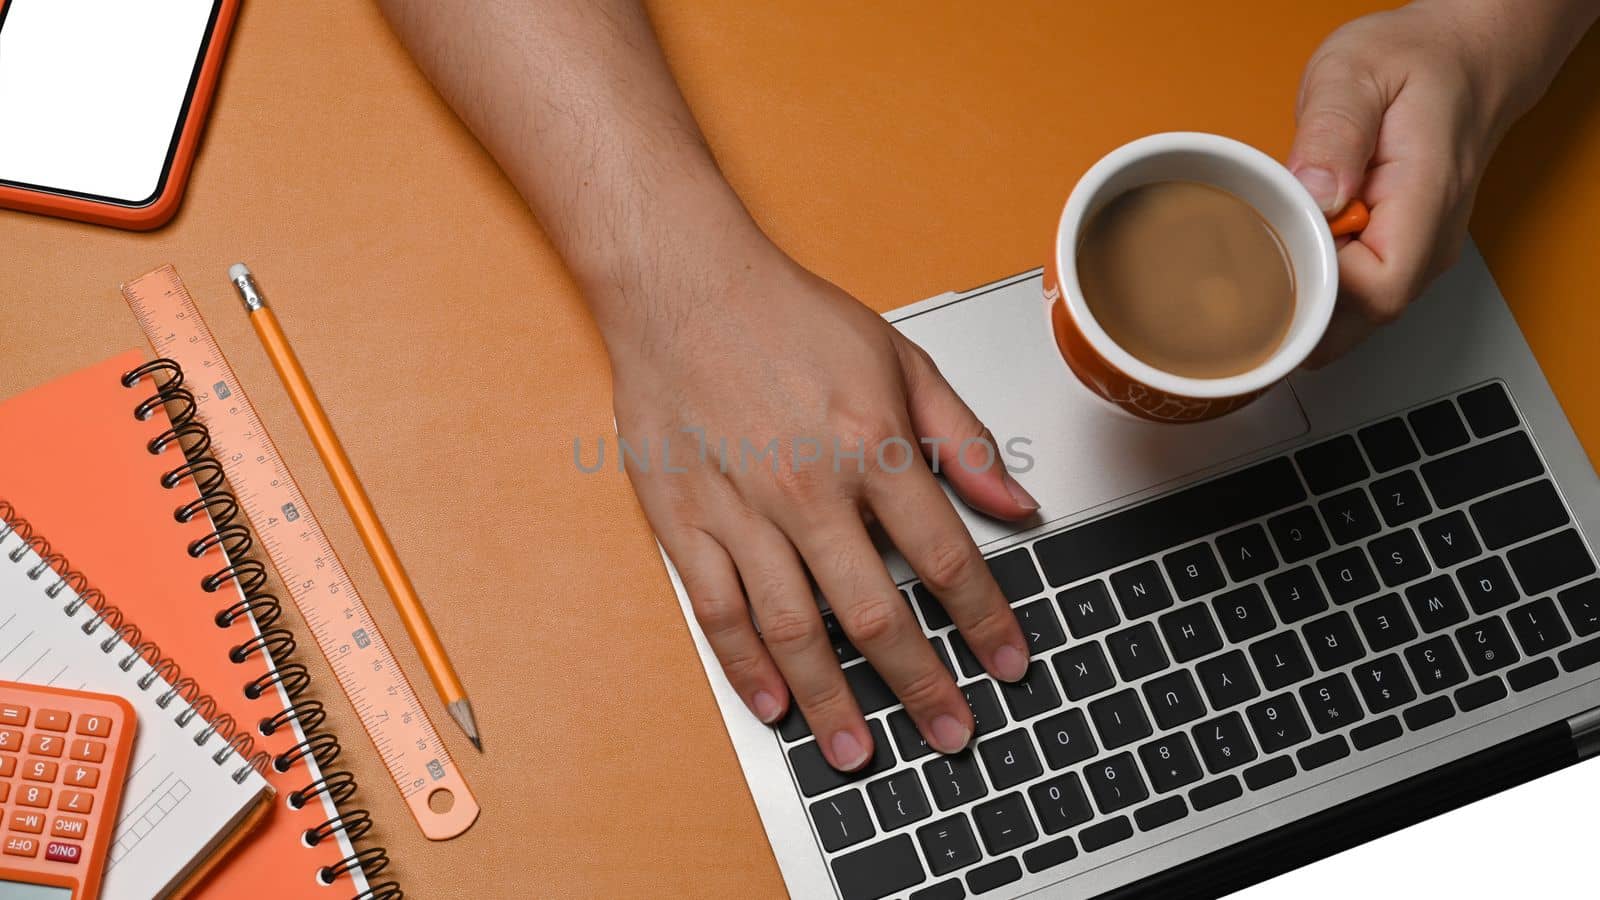 Man holding coffee cup and using laptop computer on brown leather. by prathanchorruangsak